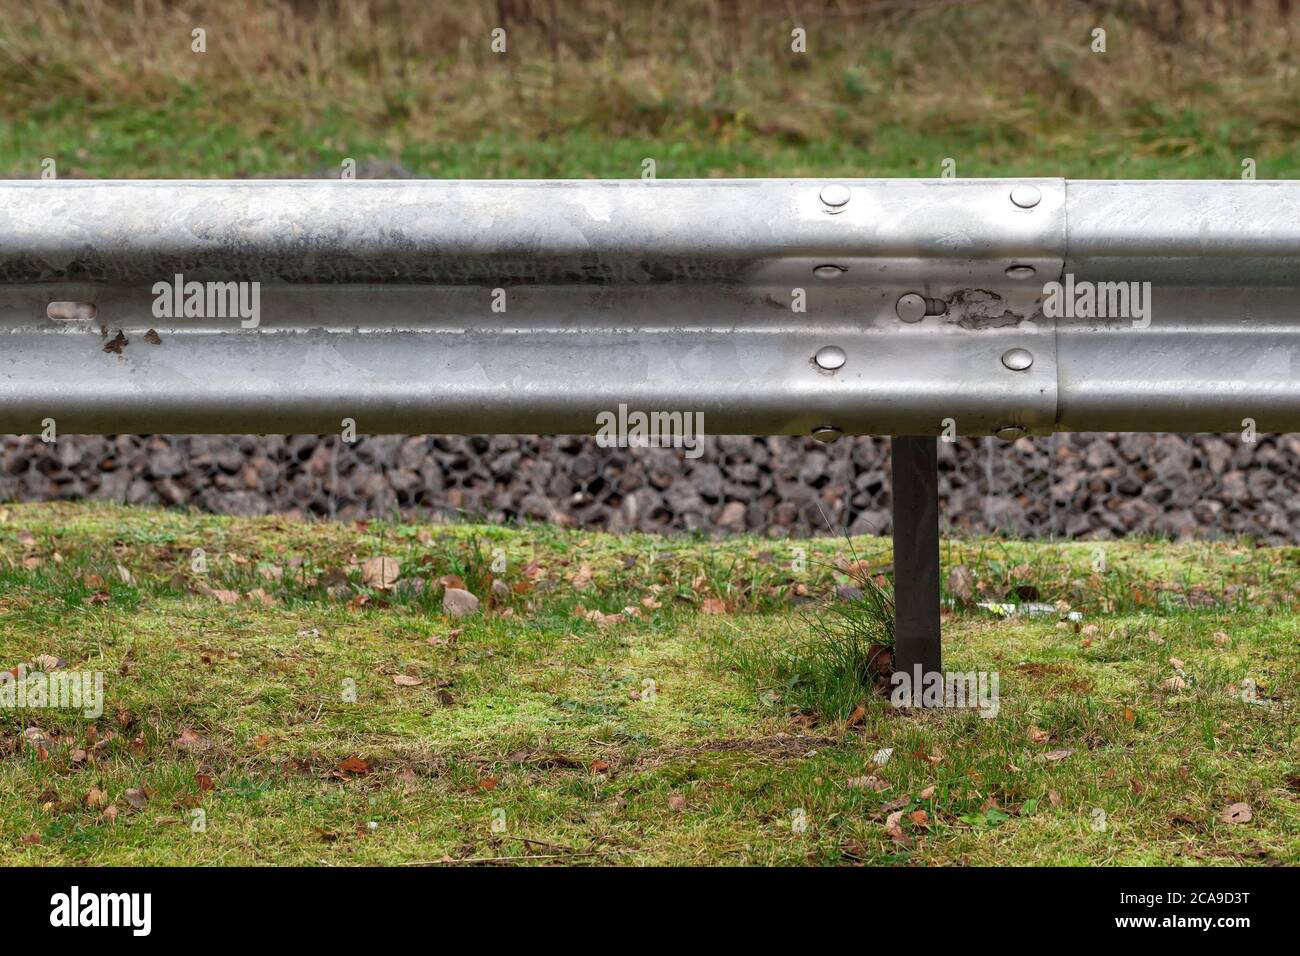 Metal guardrail mounted on a highway roadside Stock Photo